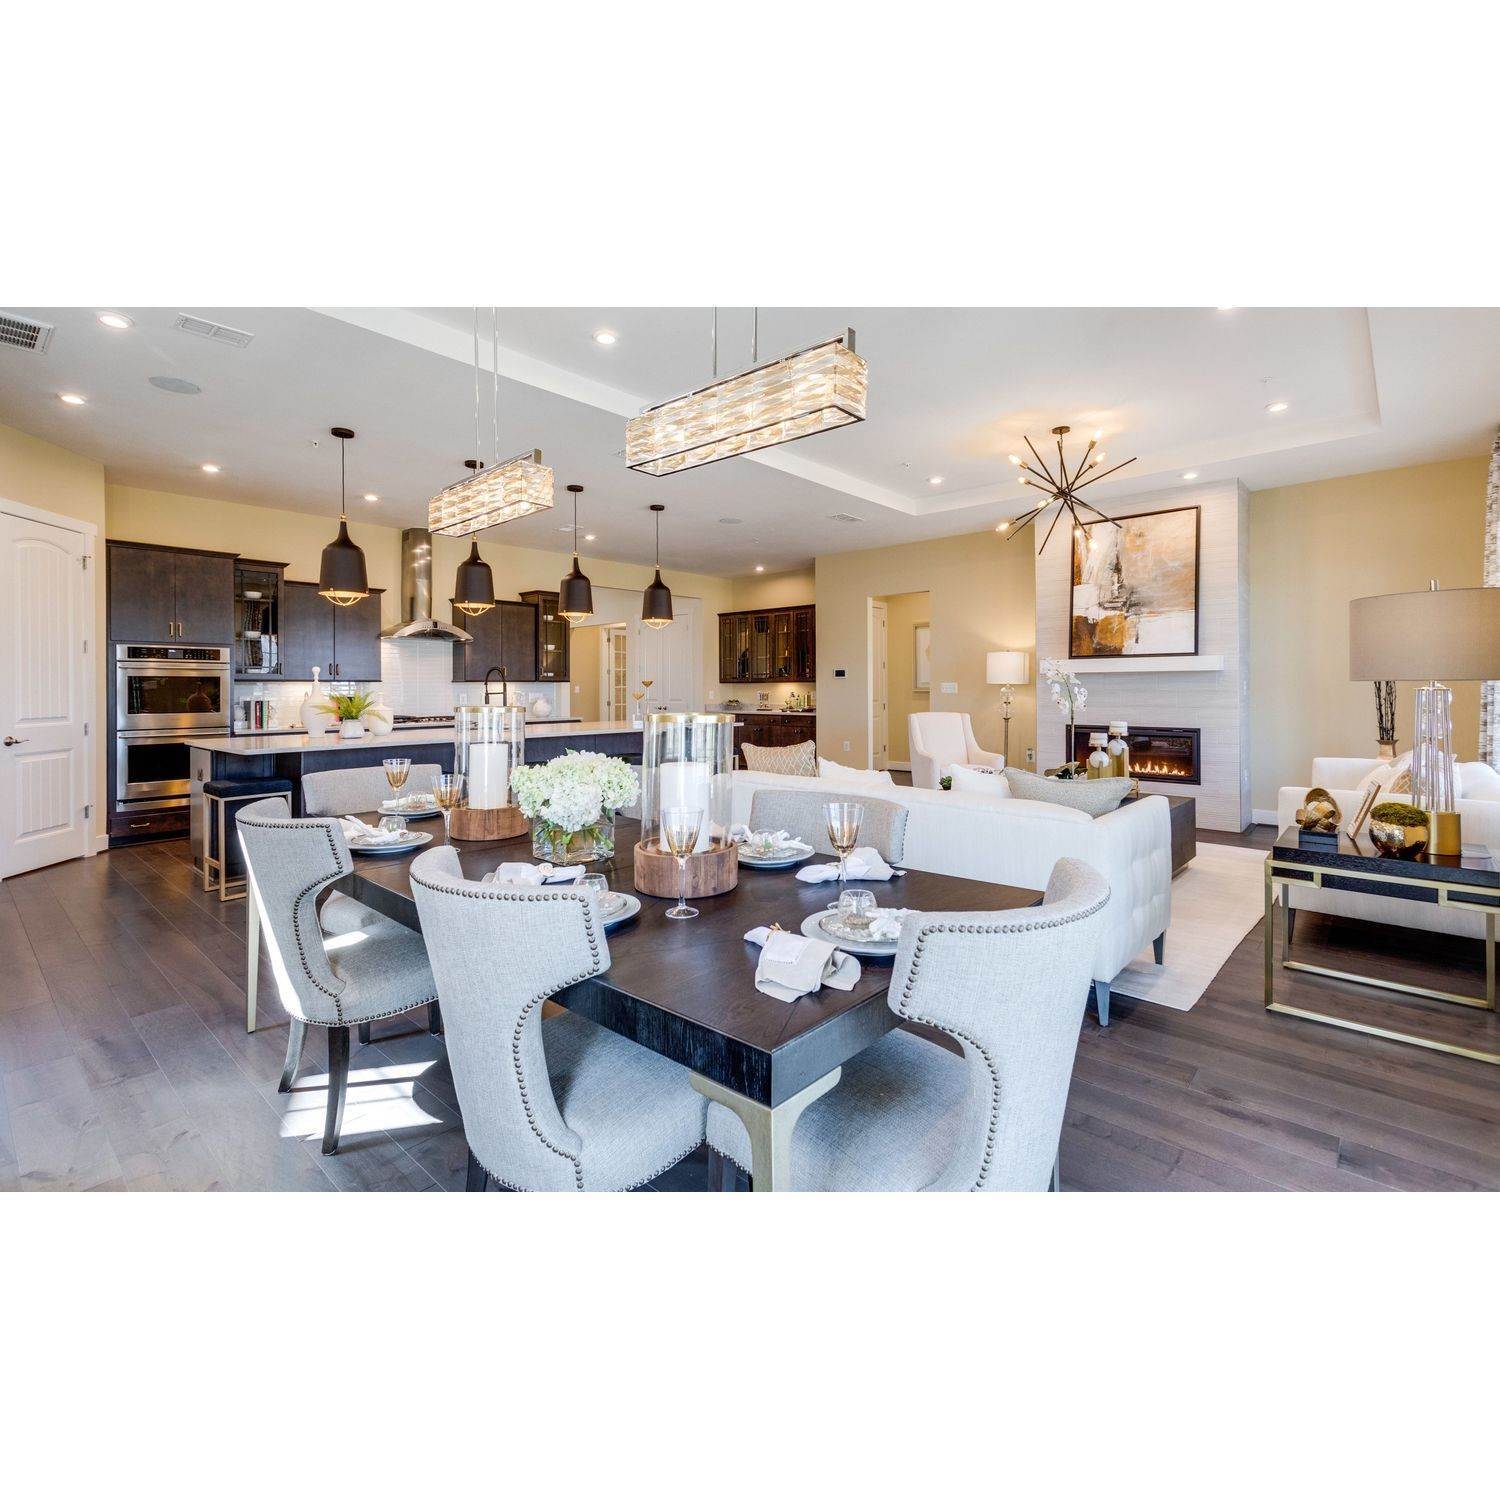 6. Single Family for Sale at K. Hovnanian's® Four Seasons At Kent Island - Sing 203 Bayberry Drive, Chester, MD 21619